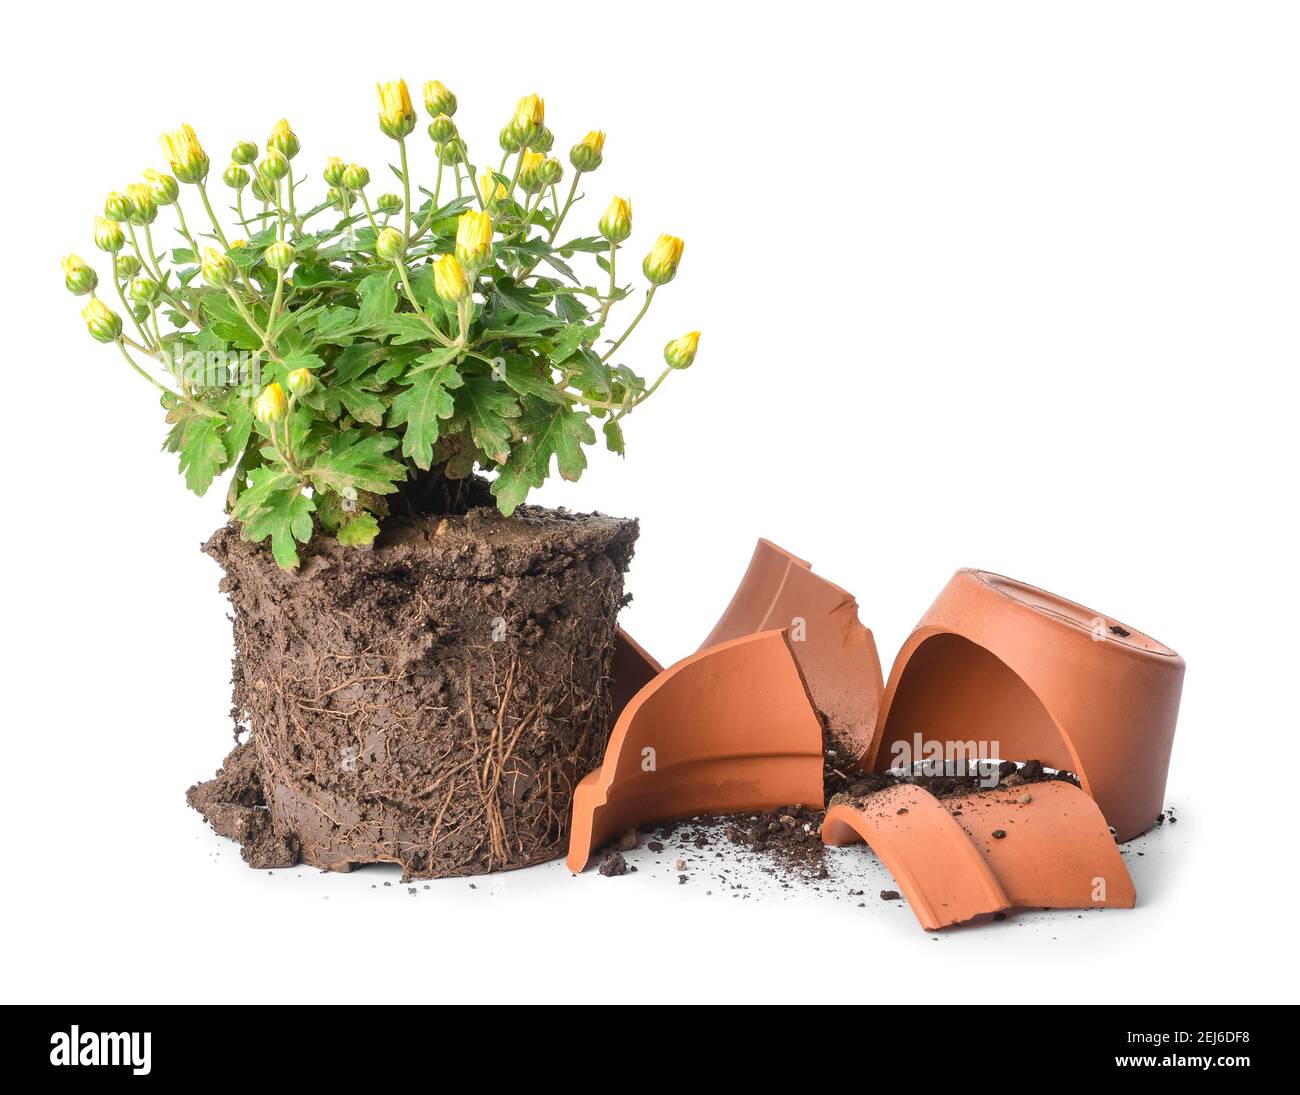 Broken flower pot and plant on white background Stock Photo - Alamy